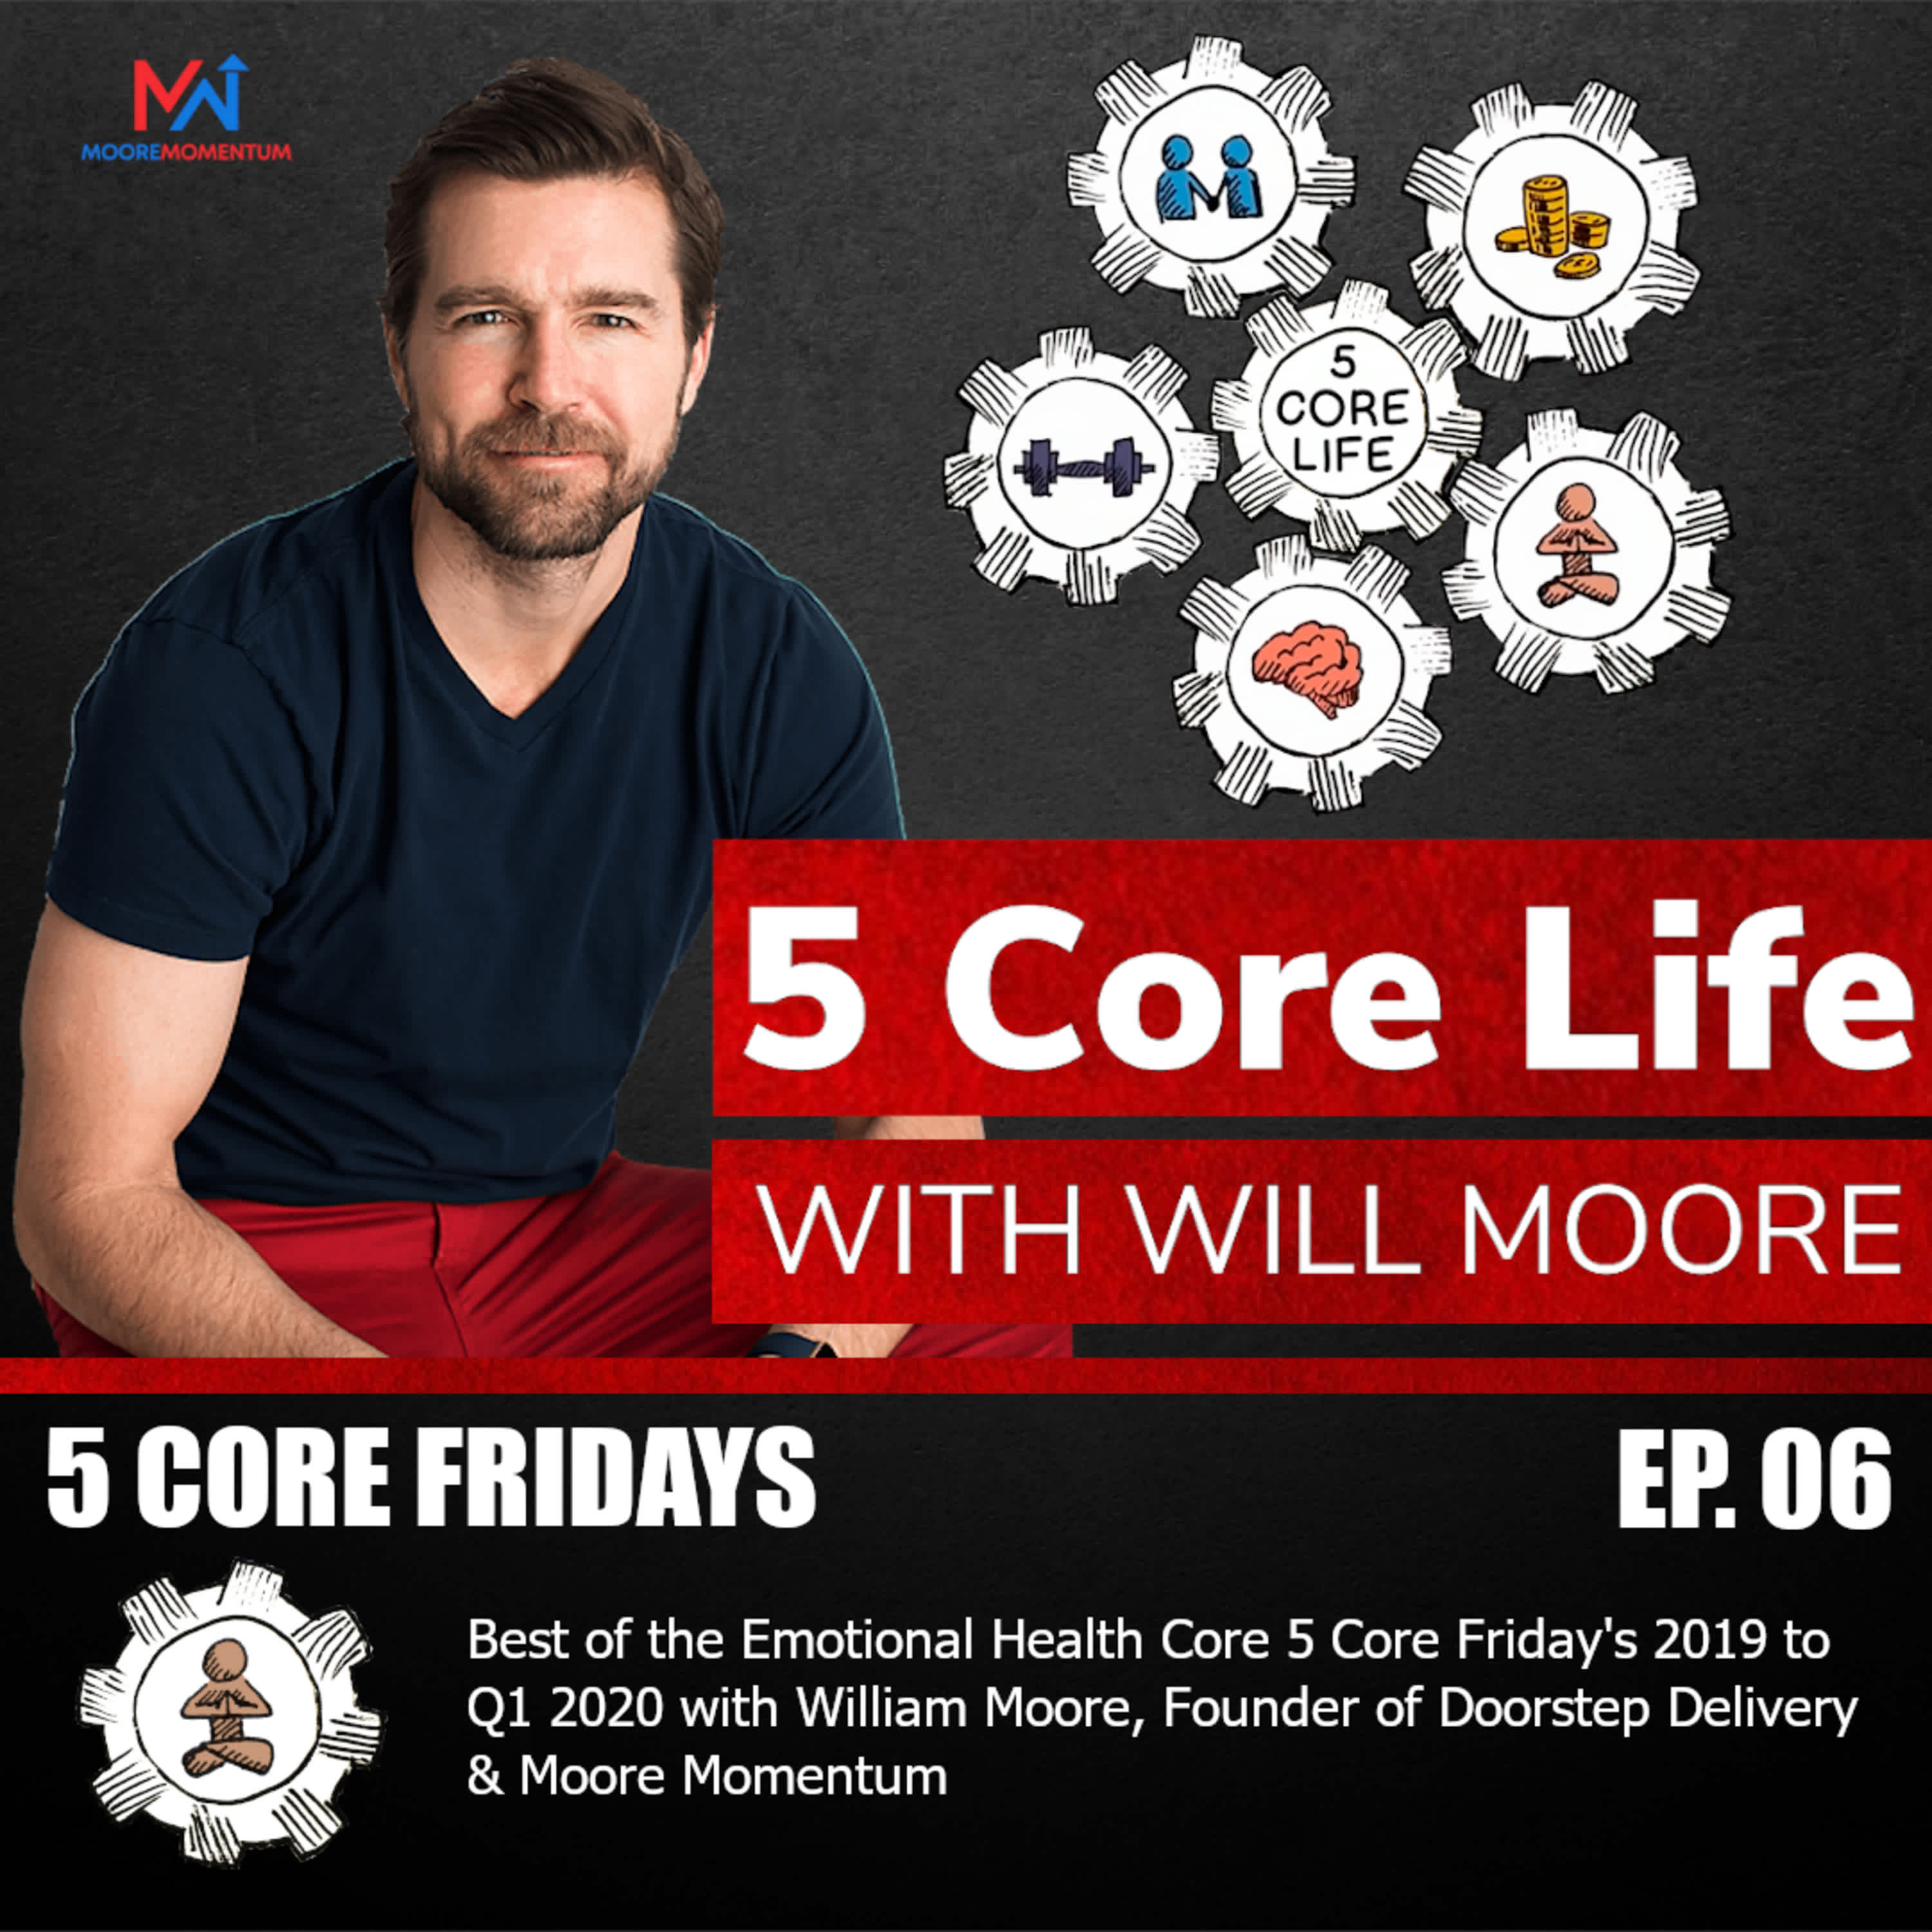 Best of the Emotional Health Core 5 Core Friday's 2019 to Q1 2020 with William Moore, Founder of Doorstep Delivery & Moore Momentum